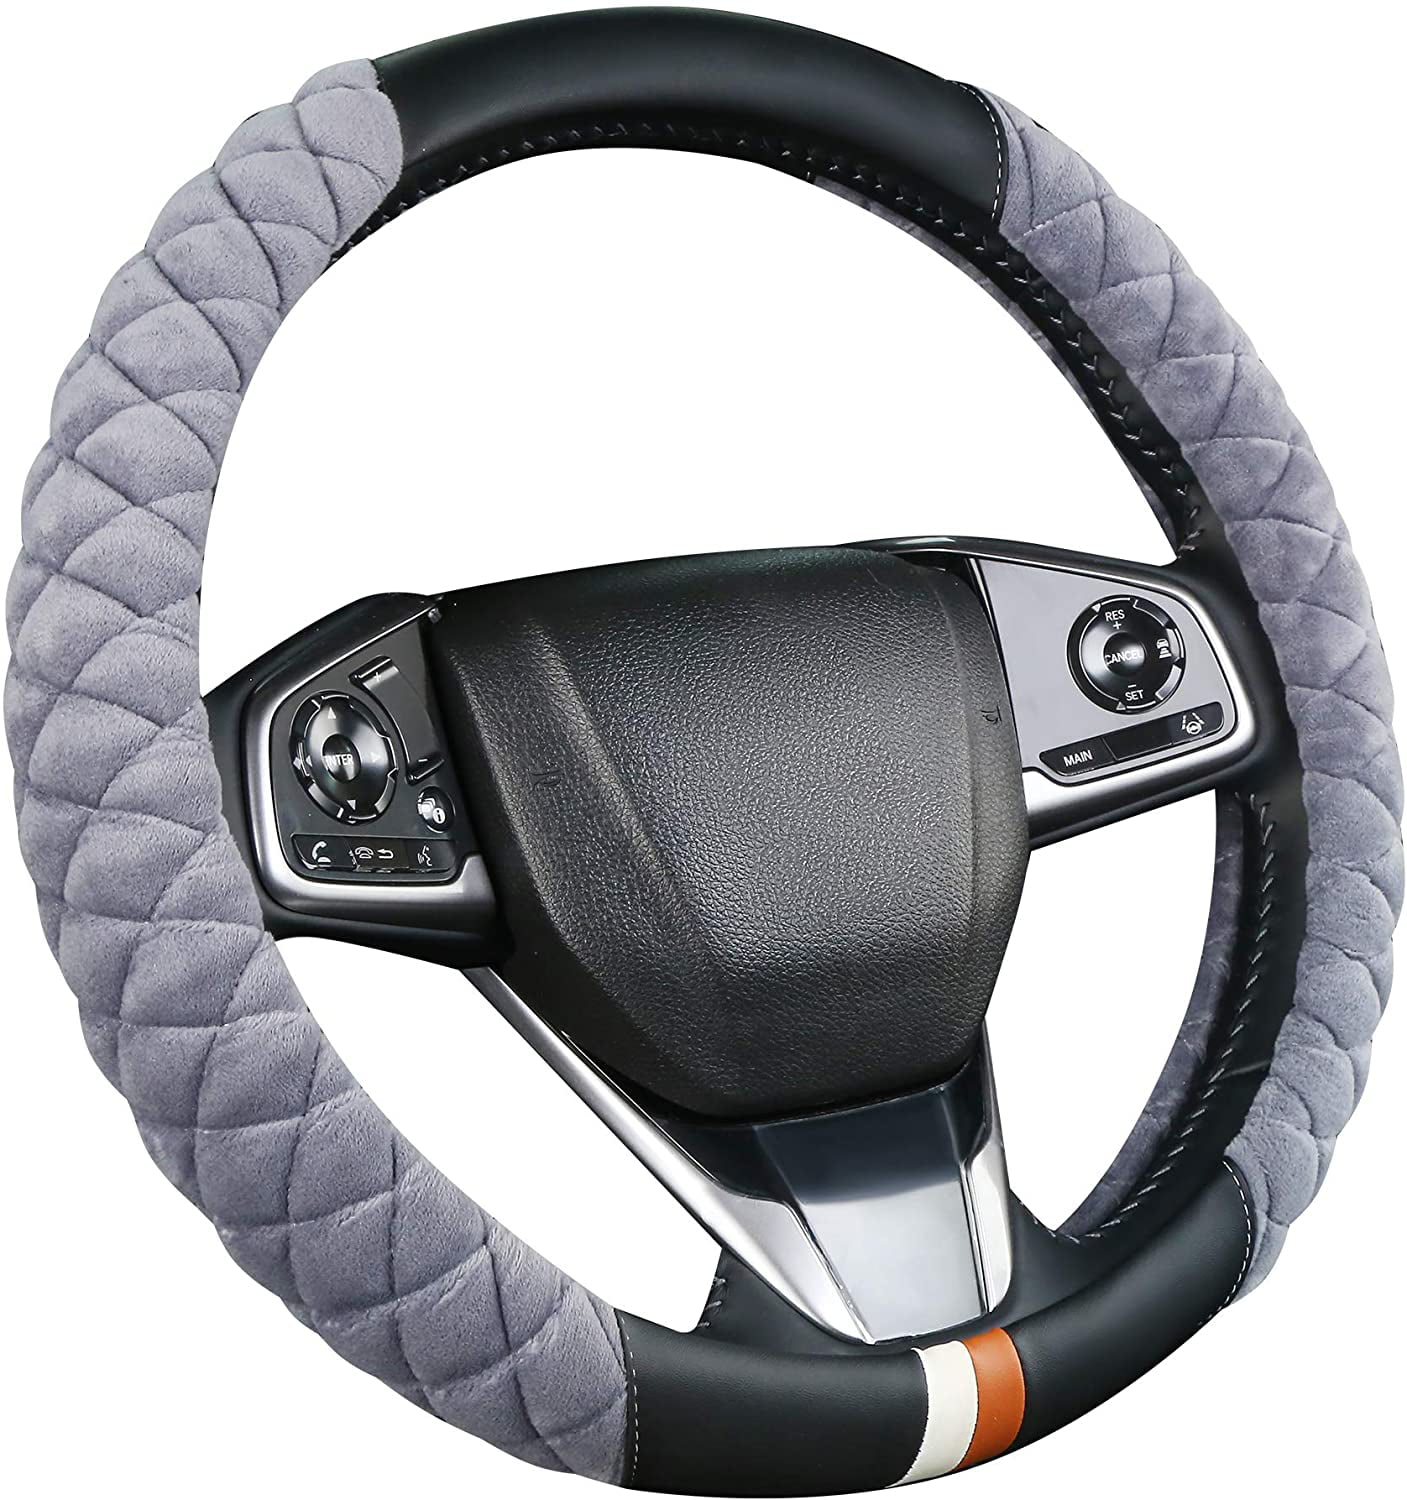 Microfiber Leather Steering Wheel Cover for Women and Men Universal 15 inch Breathable Non-Slip Auto Car Steering Wheel Accessories Black + Red Line